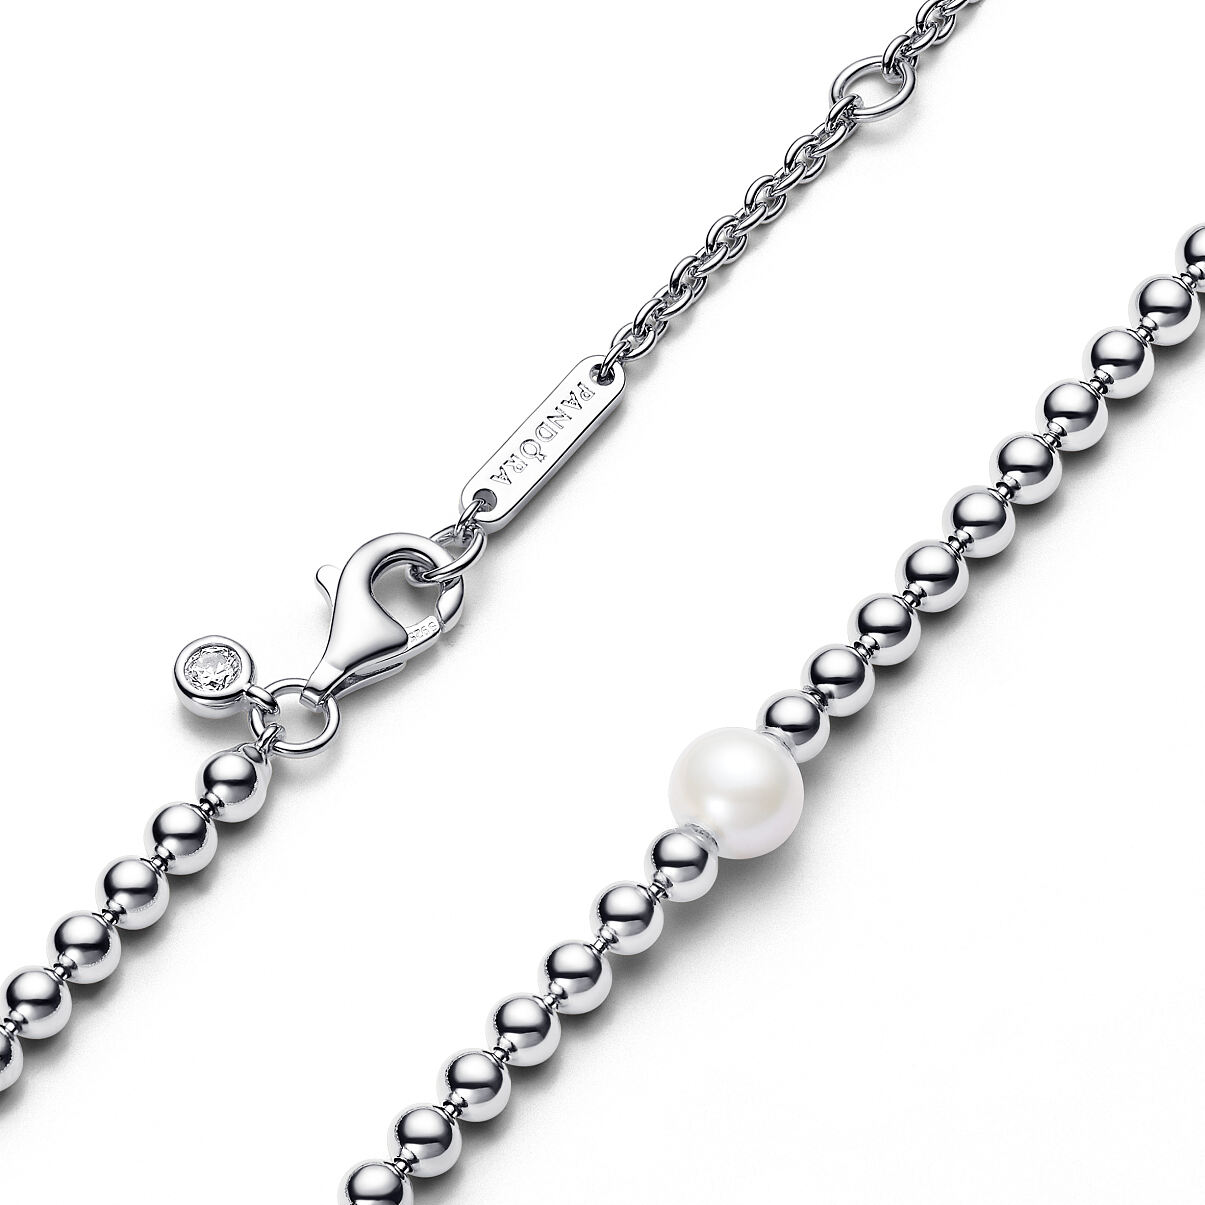 Pandora_Necklace_Sterling Silver_Freshwater Pearls_Cubic Zirconia_393176C01_149,00 Euro (3)